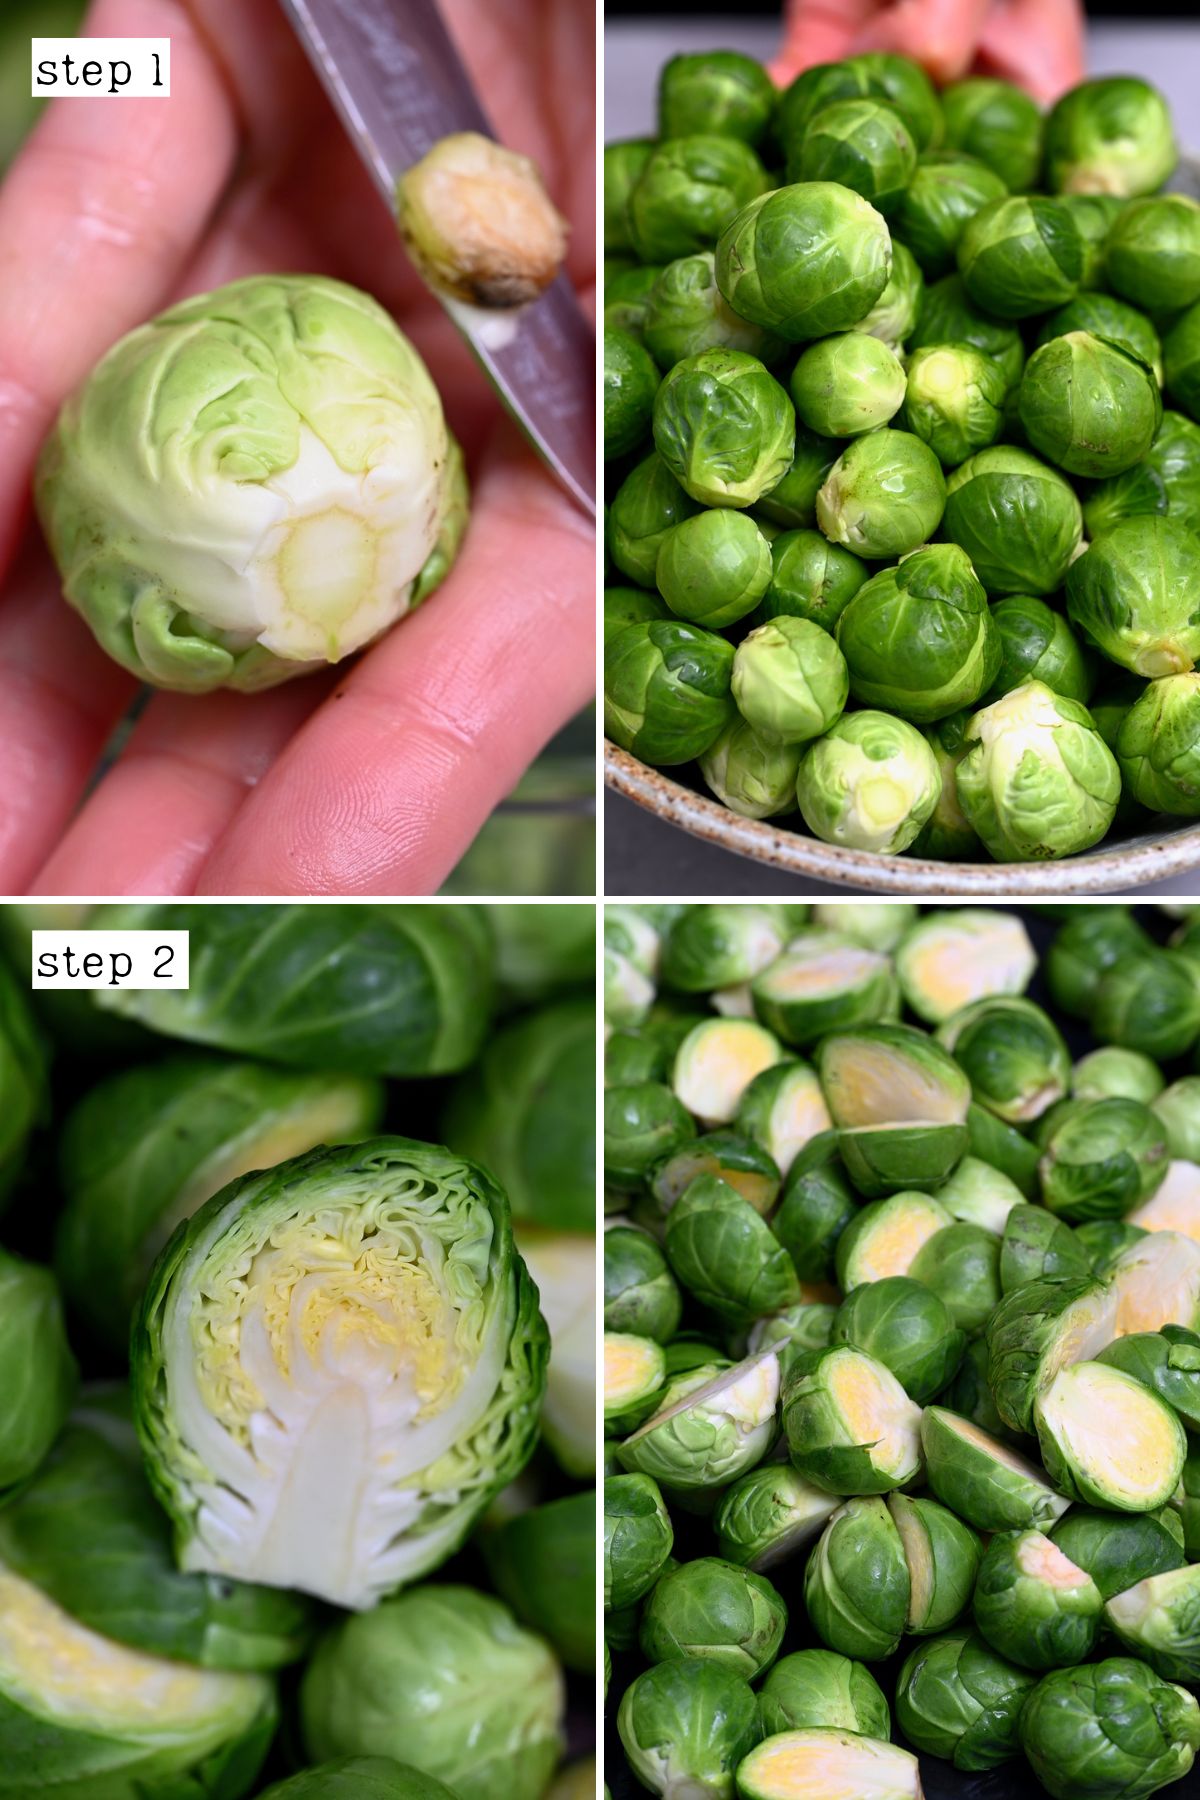 Steps for trimming and cutting sprouts